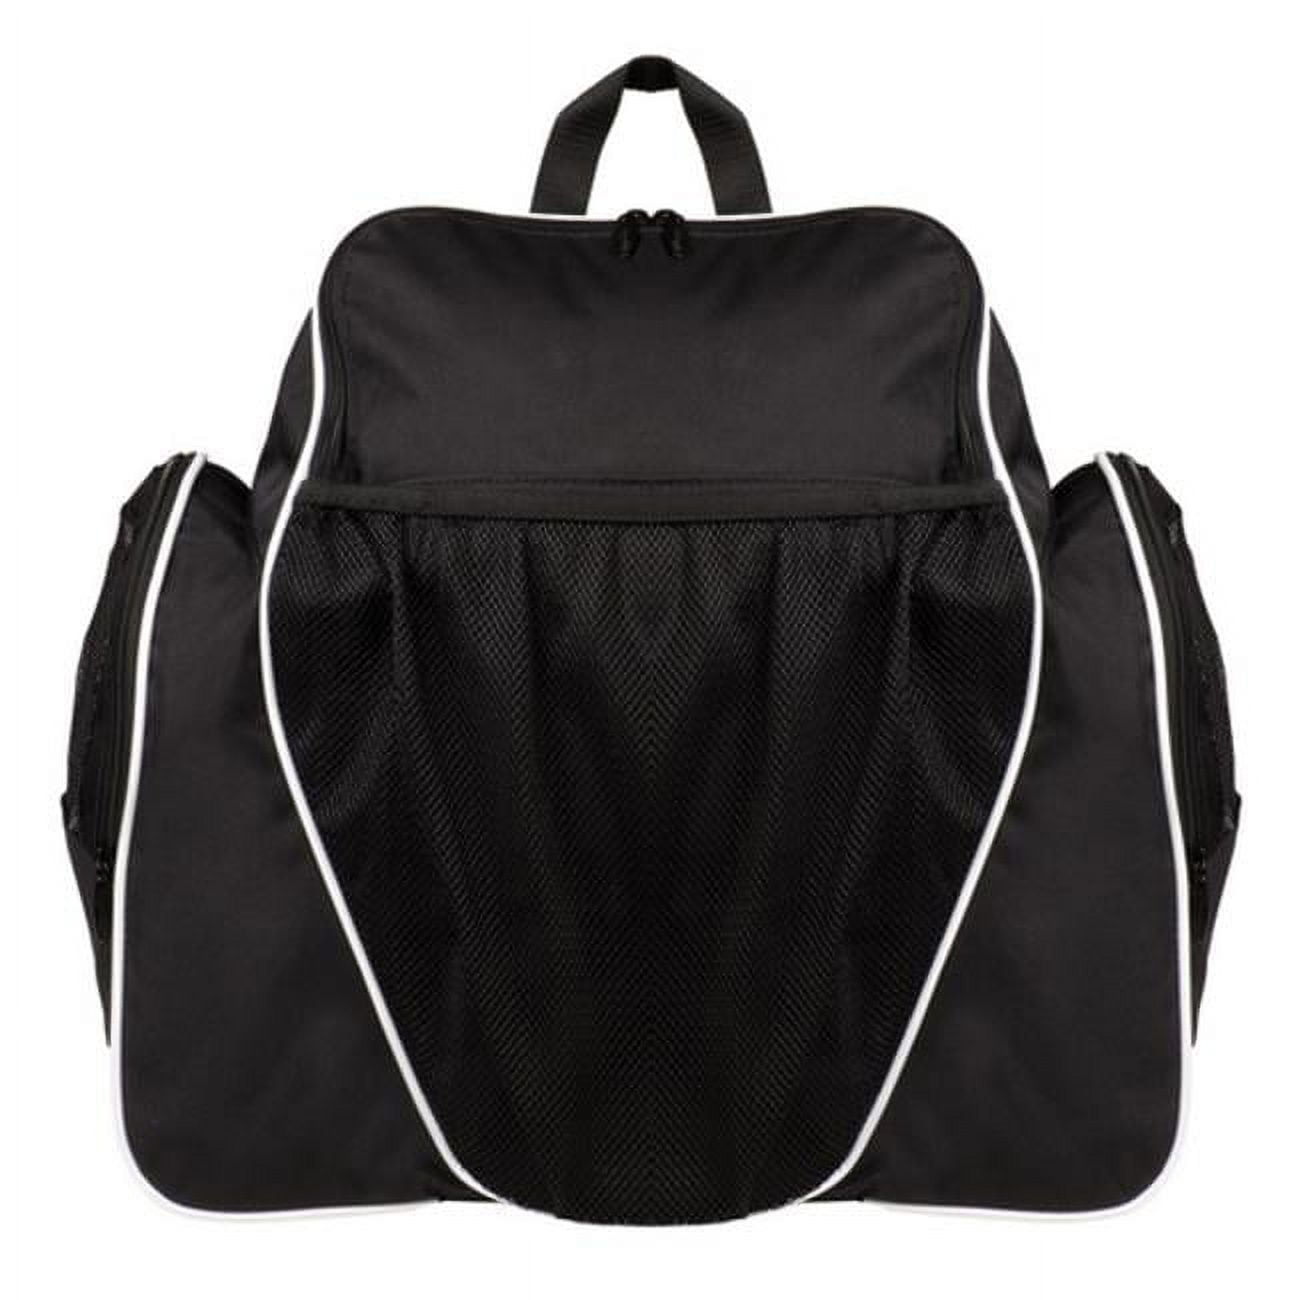 18 X 19 X 10 In. Deluxe All Purpose Backpack, Black